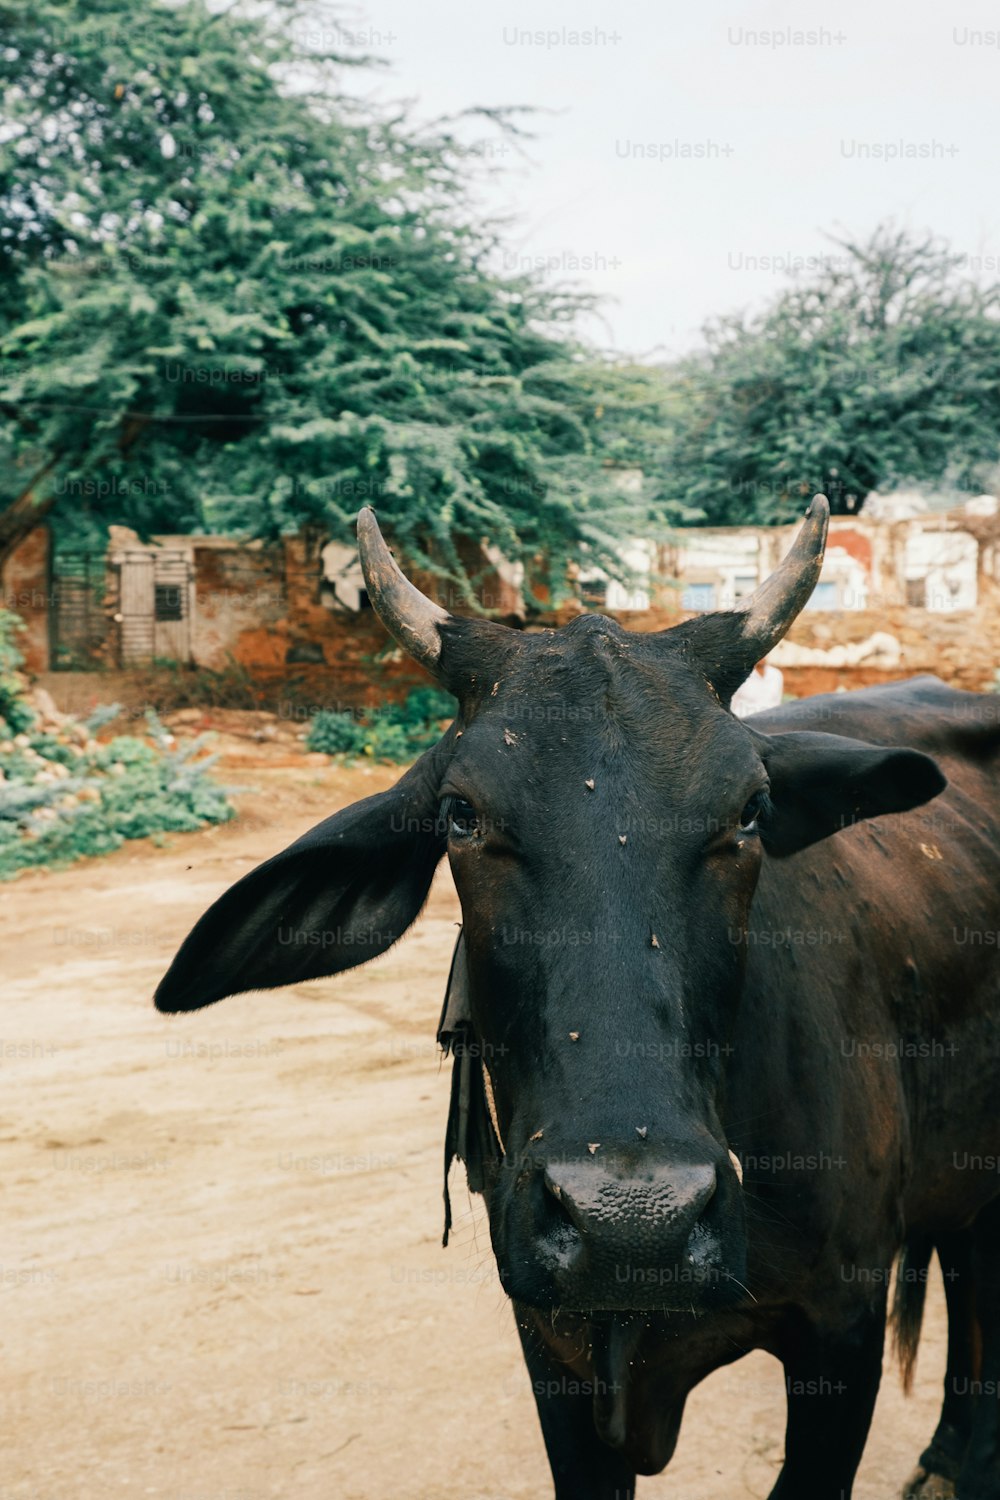 a black cow standing on a dirt road